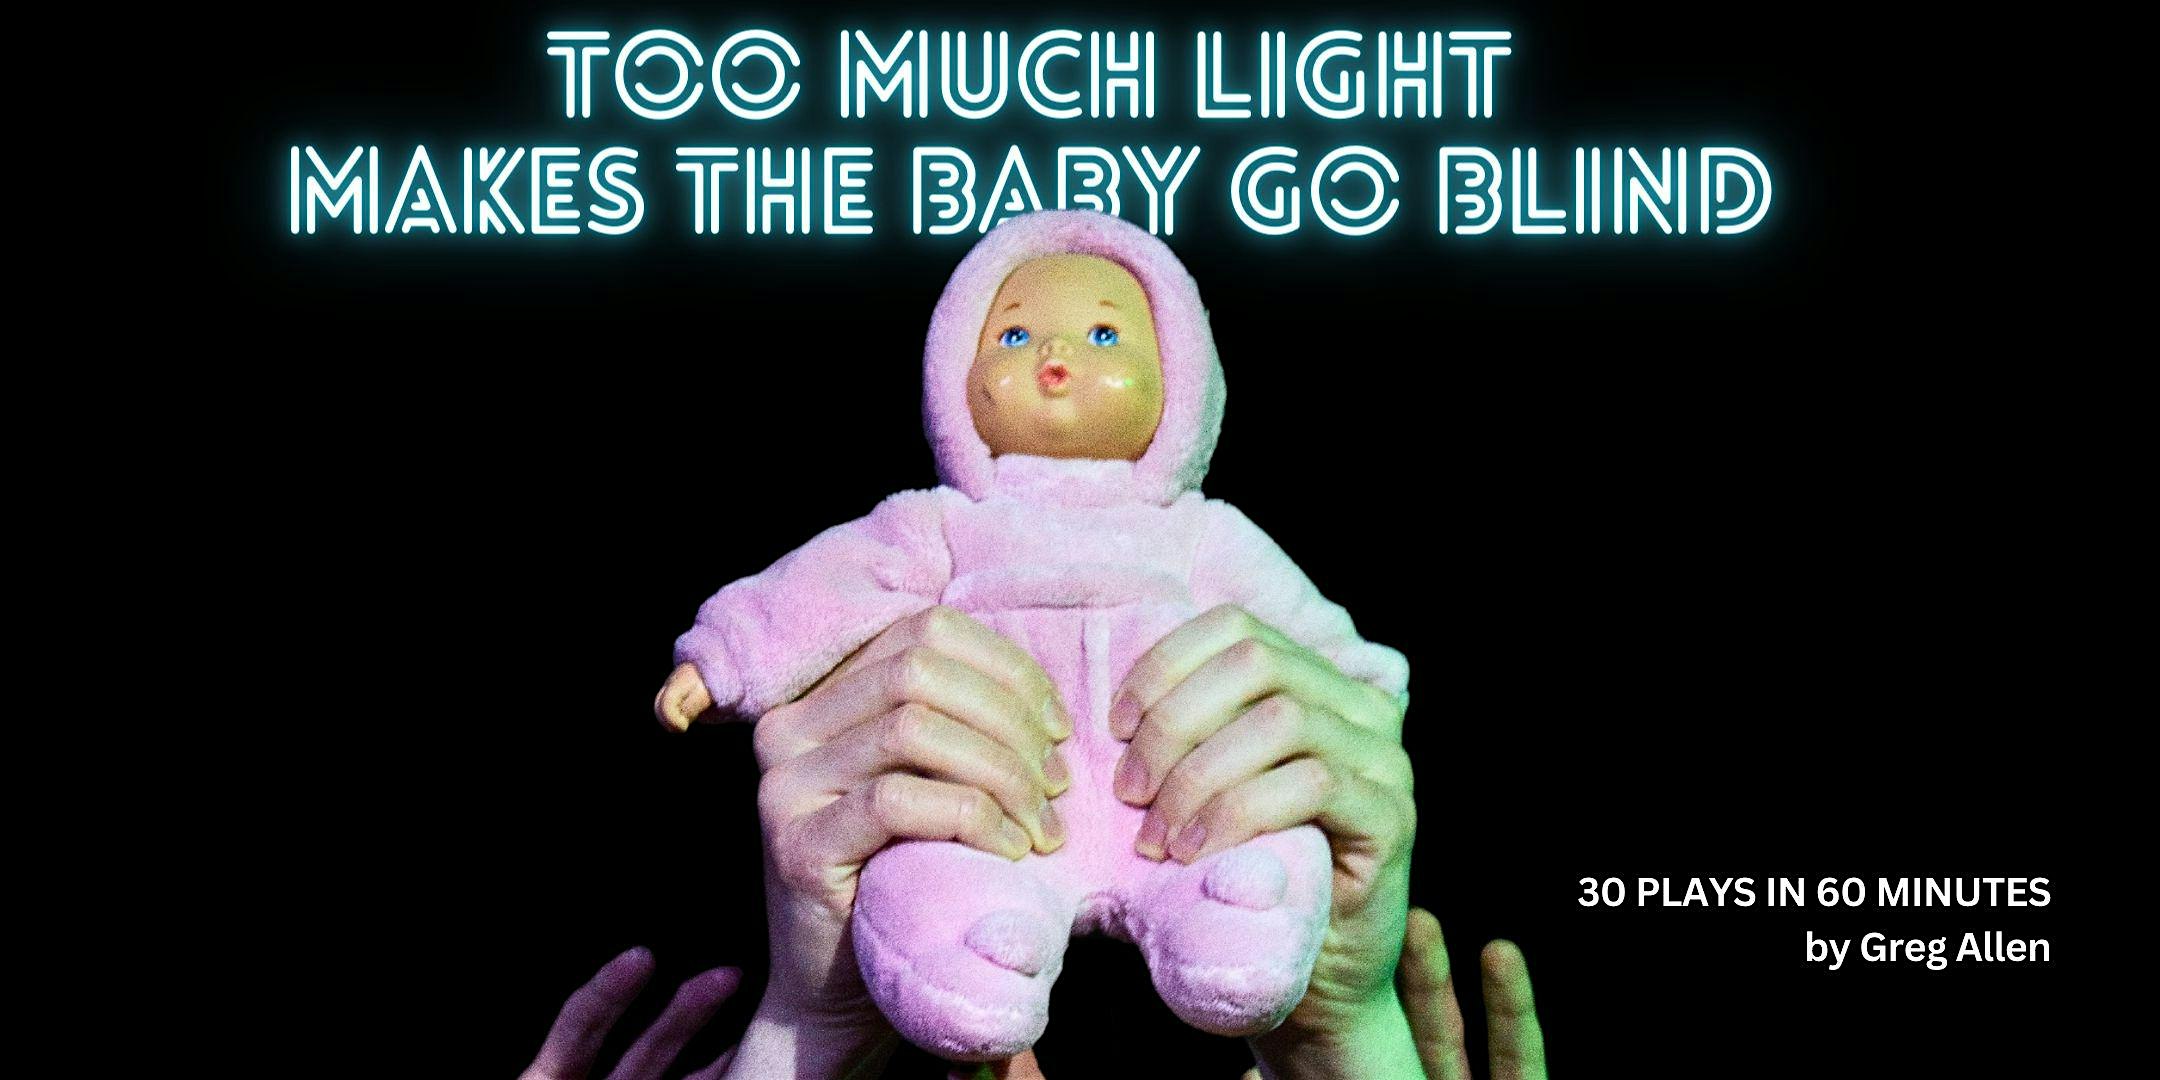 Too Much Light Makes The Baby Go Blind (30 Plays in 60 Minutes)